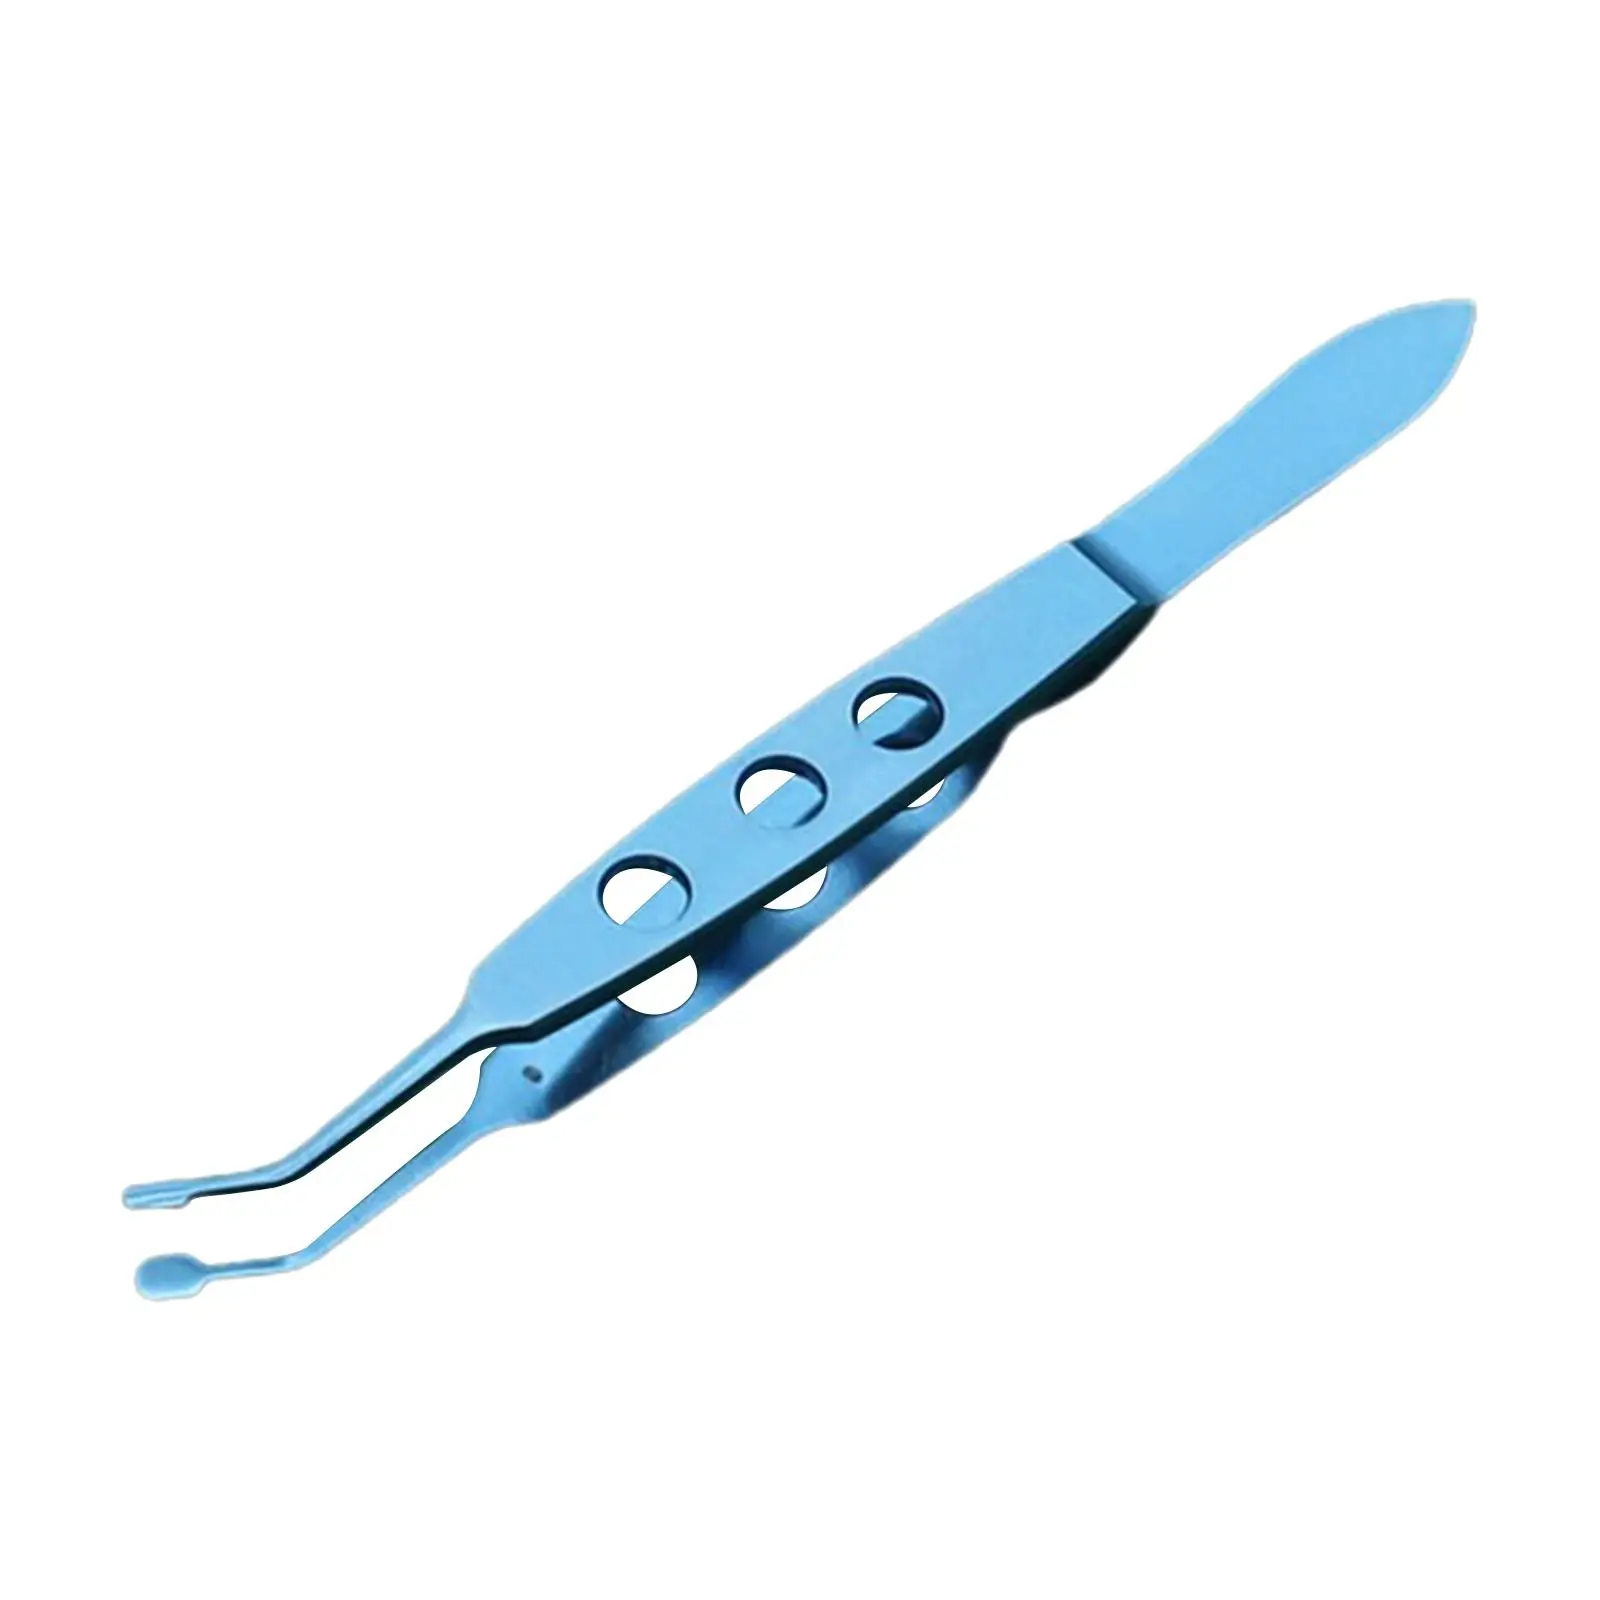 Meibomian Gland Forceps Tweezer Tool Ophthalmological Micros Eyelid Instruments High Precision Clamp for Meibomian Flap